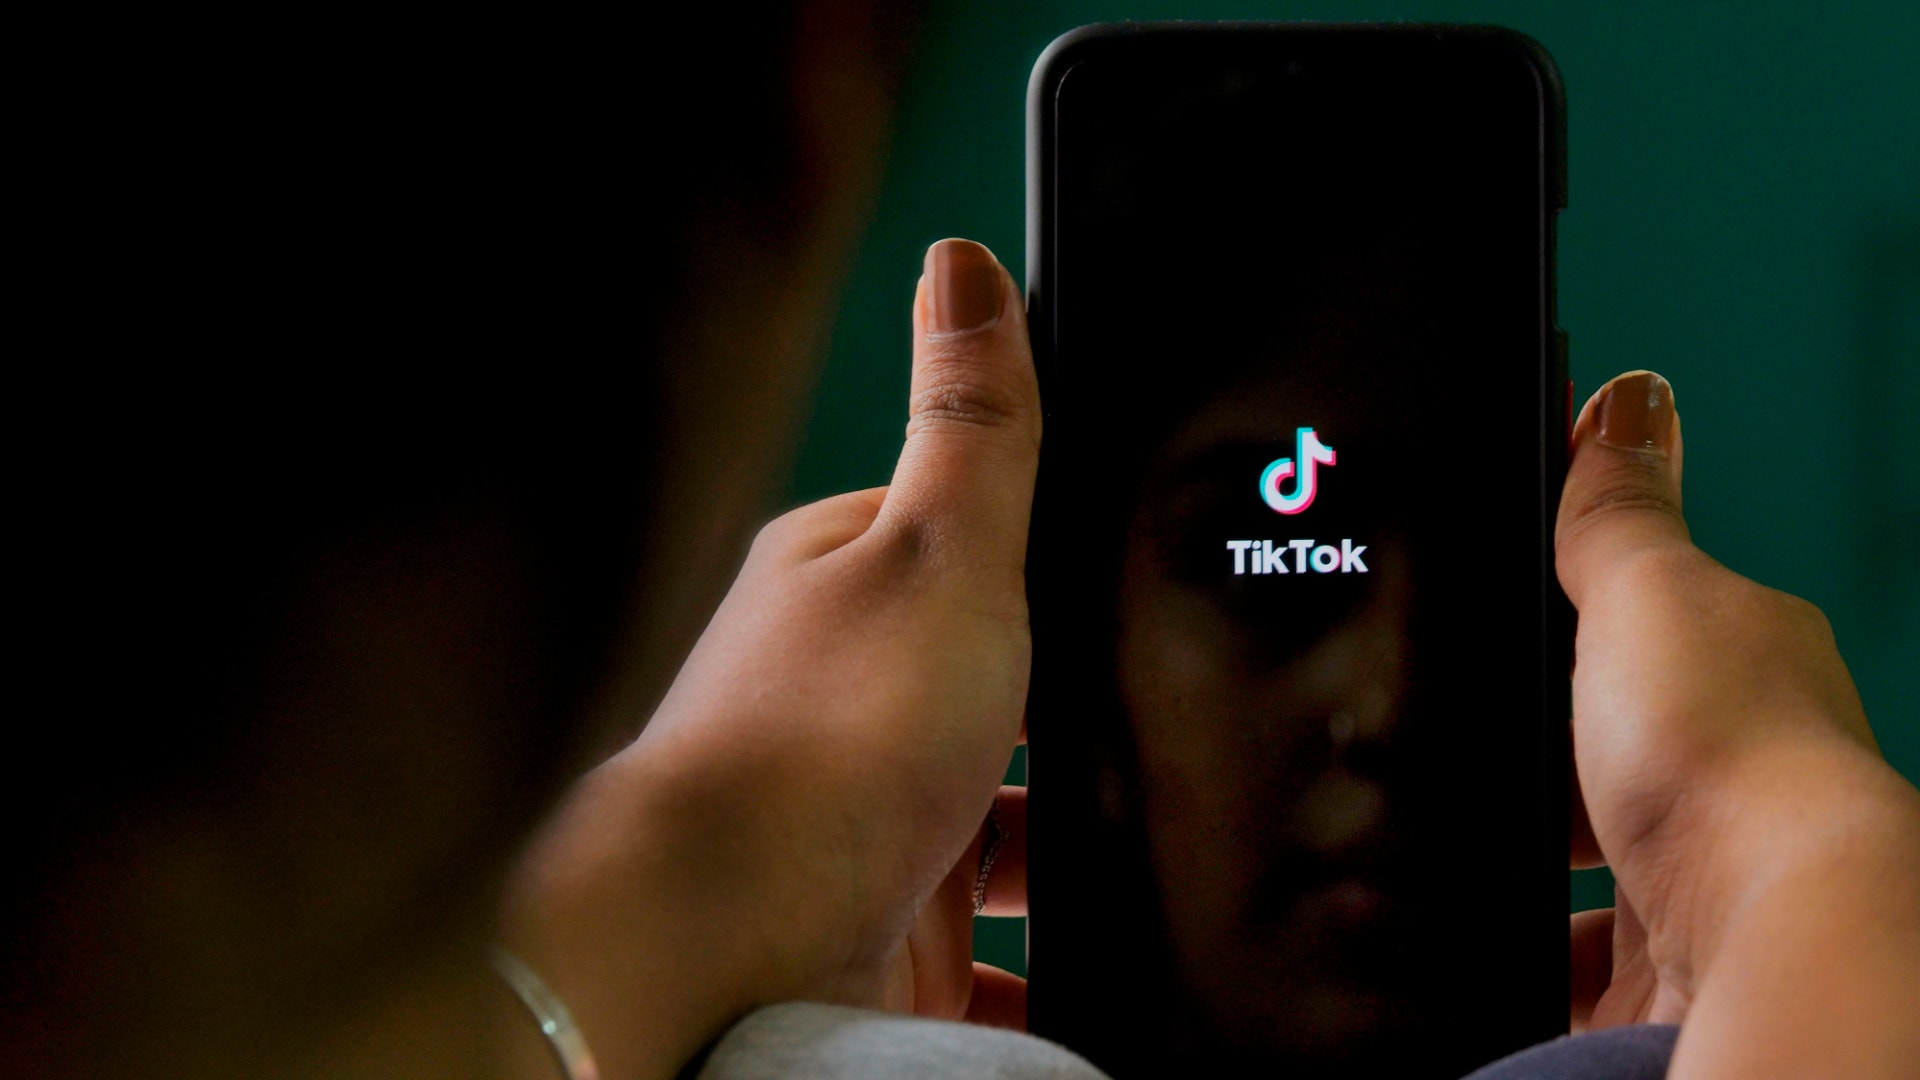 A mobile user browses through the Chinese-owned TikTok app on a smartphone in Bangalore, India. TikTok on June 30 denied sharing information on Indian users with the Chinese government, after New Delhi banned the wildly popular app, citing national security and privacy concerns. 